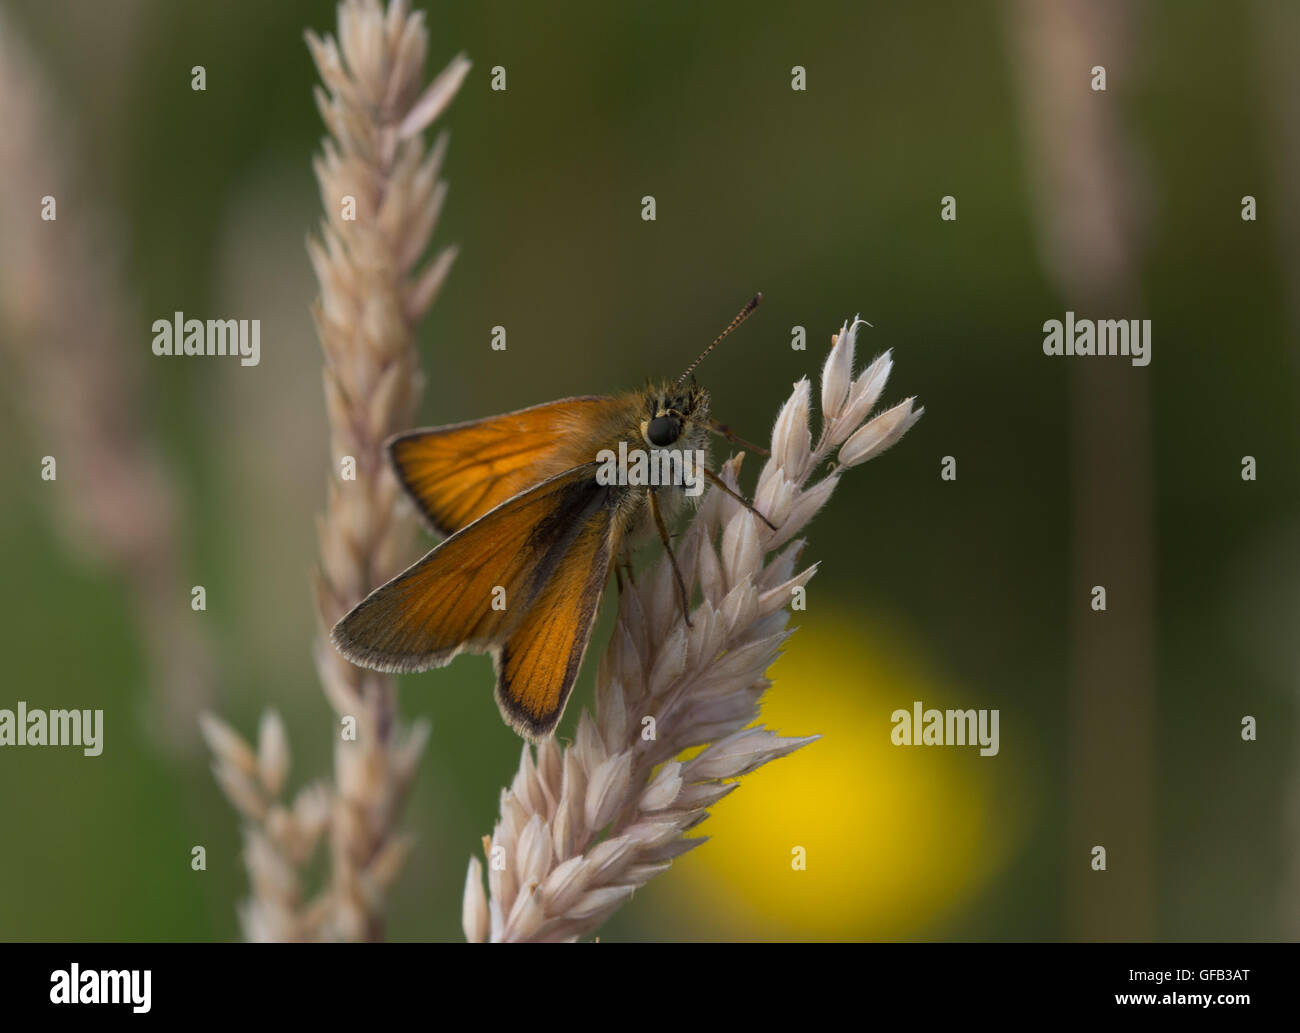 Essex skipper butterfly (Thymelicus lineola) on grass in Hampshire, England Stock Photo